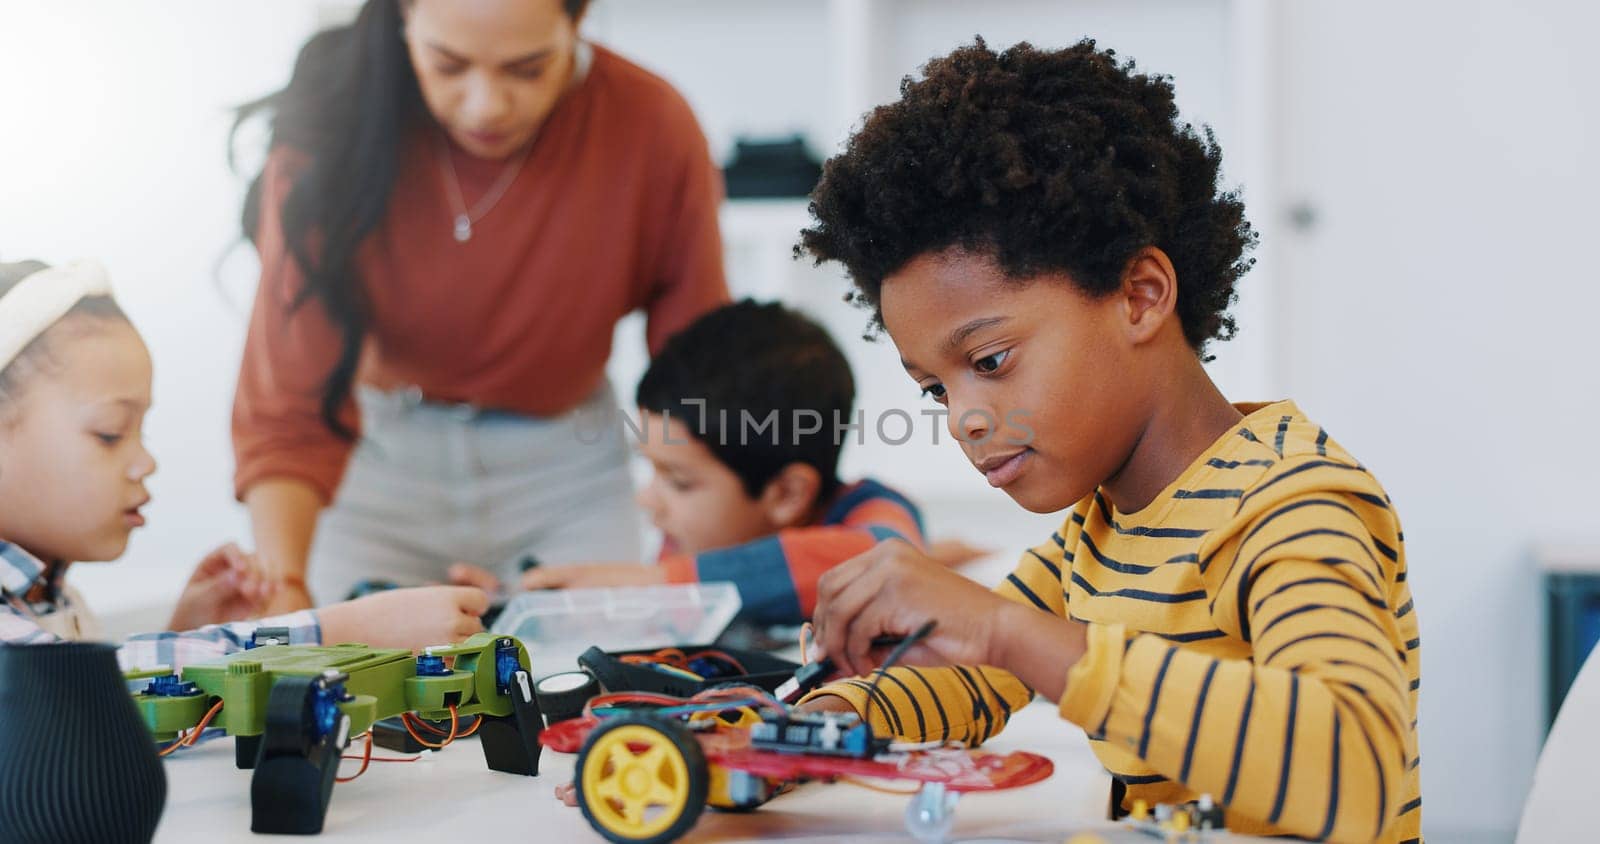 Technology, boy and car robotics at school for learning, education or electronics with car toys for innovation. Classroom, learners and transportation knowledge in science class for research or study.